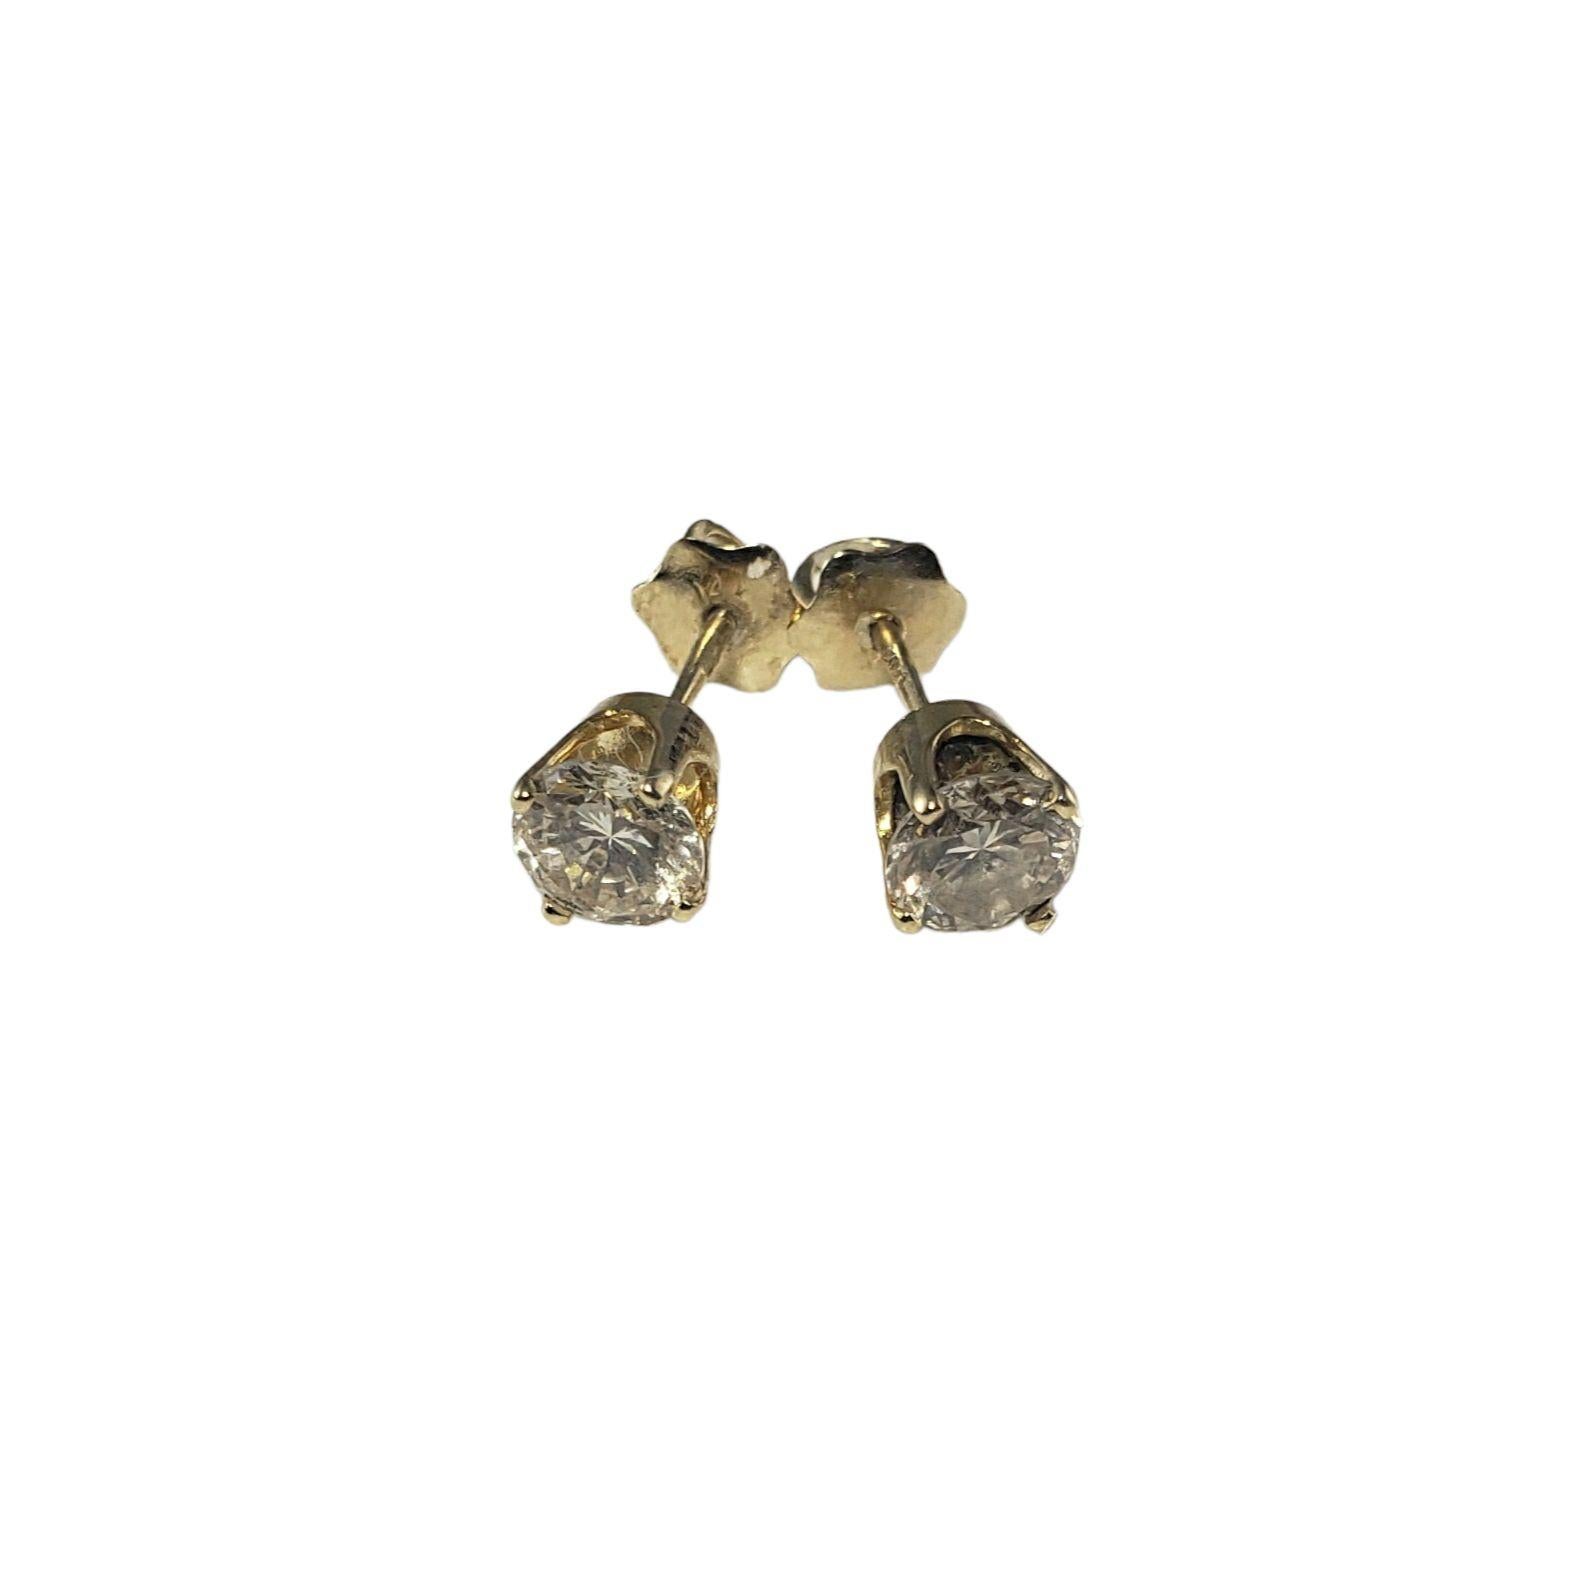 These sparkling stud earrings each features one round brilliant cut diamond set in classic 14K yellow gold.  Screw back closures.

Total diamond weight:  .84 ct.

Diamond color:  I-J

Diamond clarity:  SI1-SI2

Size: 5 mm

Weight:  .82 gr./  .52